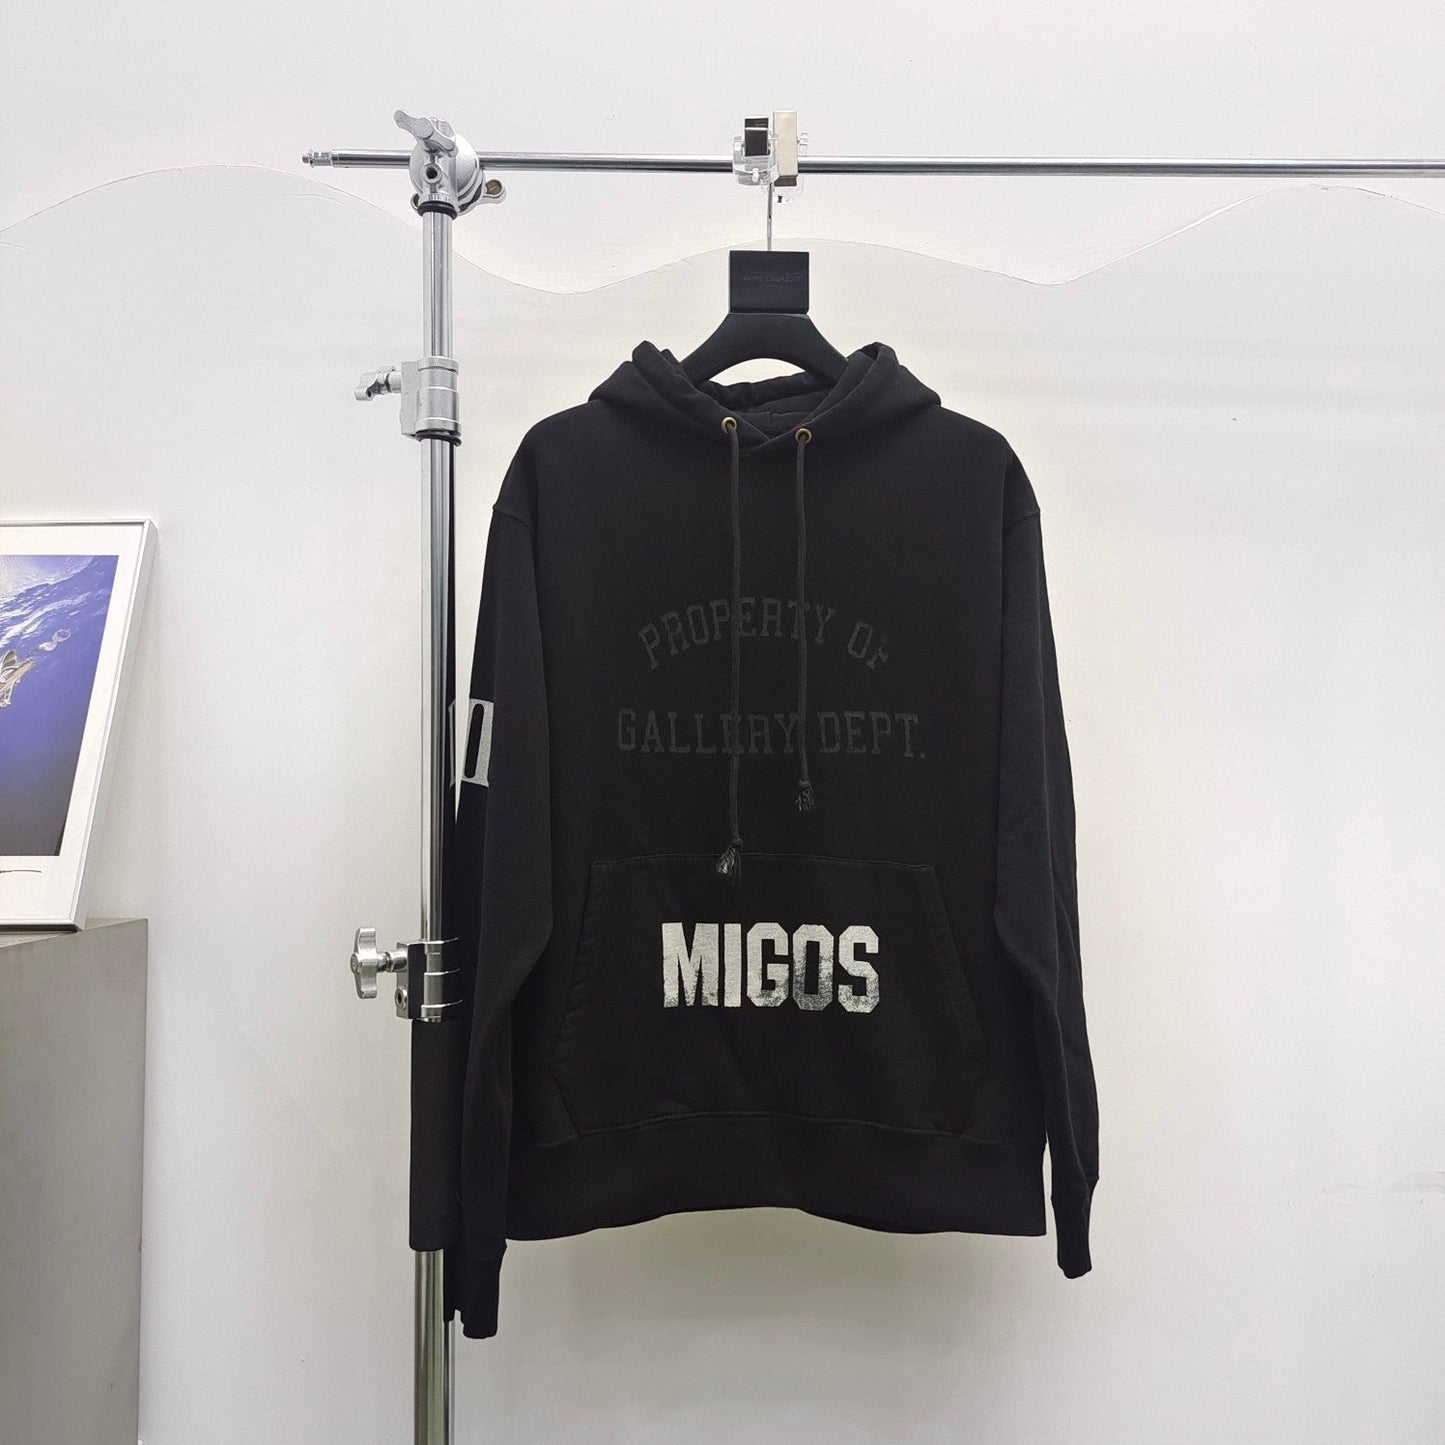 Migos x Gallery Dept. For Culture III YRN Hoodie